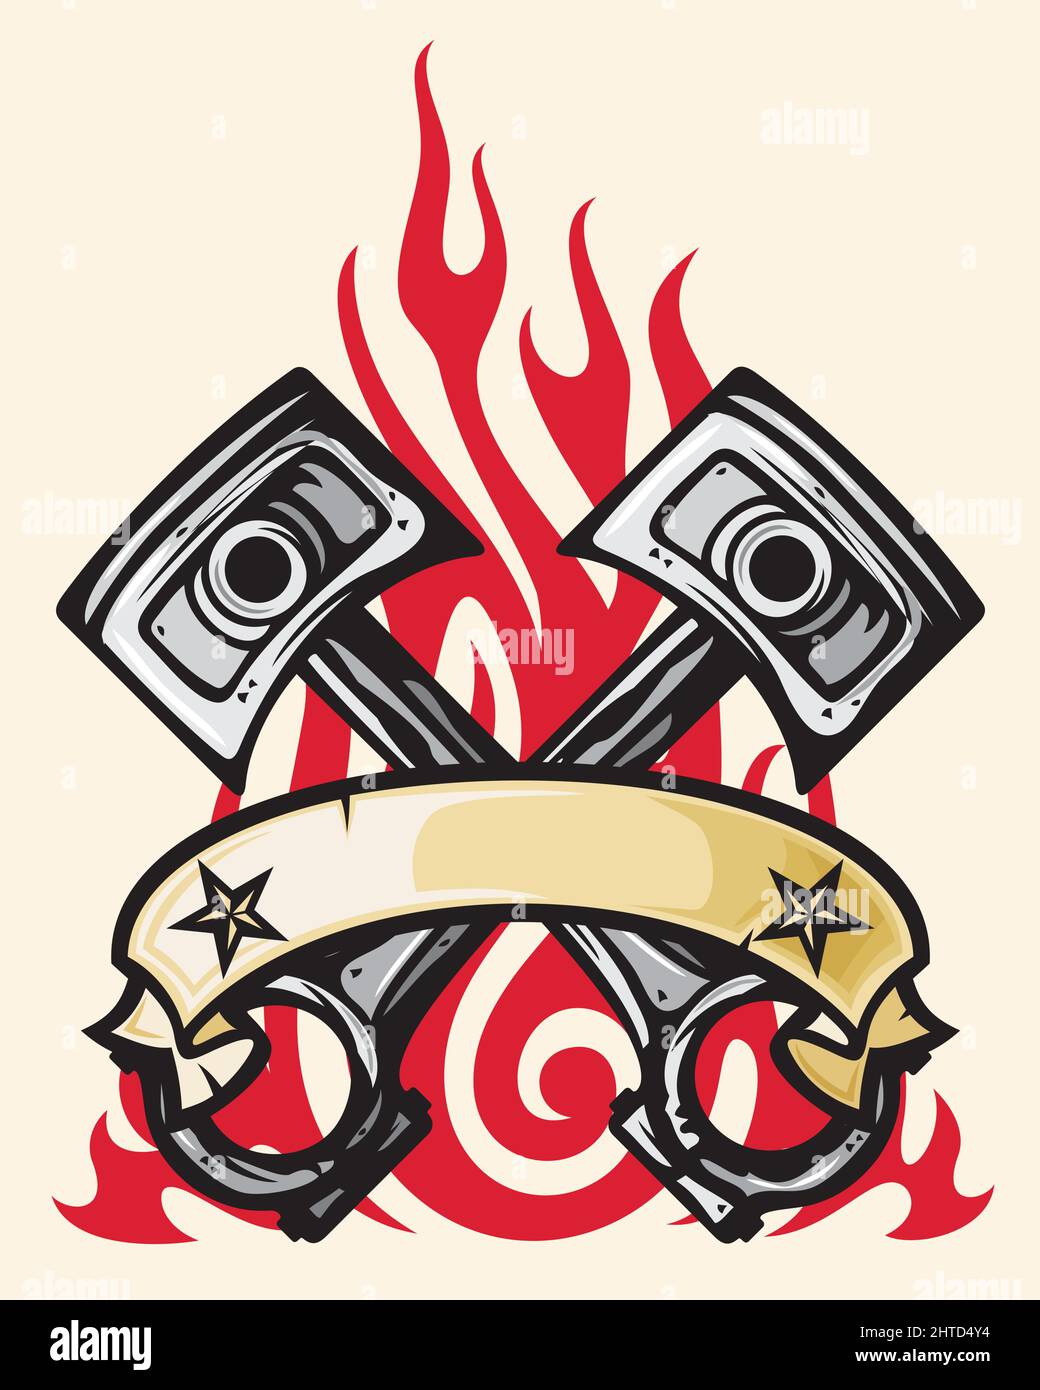 Piston Tattoo Vector Images over 1000